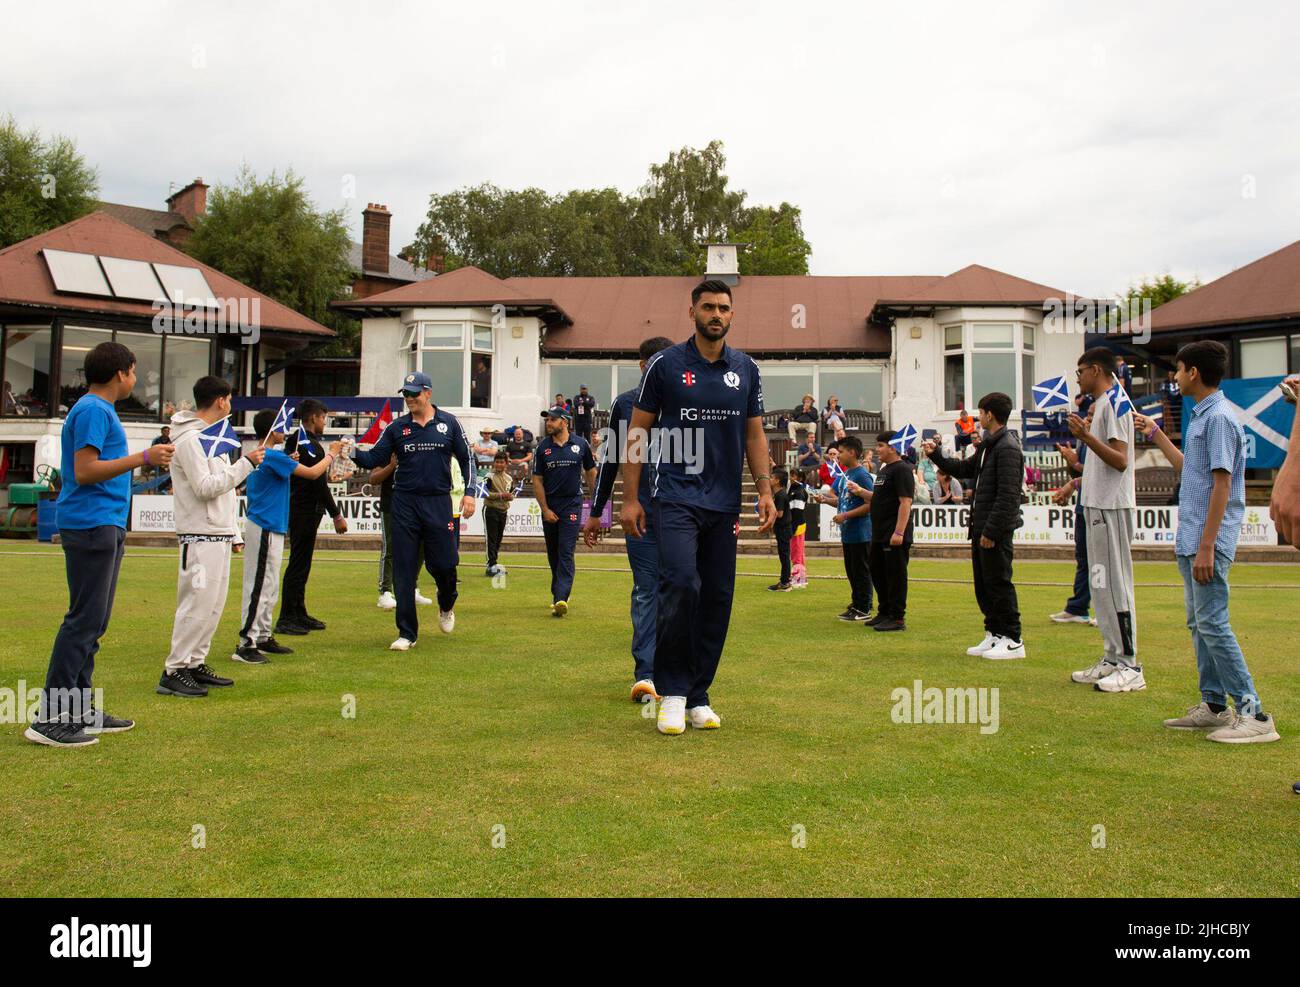 ICC Men's Cricket World Cup League 2 - Scotland v, Nepal. 17th July, 2022. Scotland take on Nepal for the second time in the ICC Div 2 Men's Cricket World Cup League 2 at Titwood, Glasgow. Pic shows: The Scotland team take the field through the guard of honour. Credit: Ian Jacobs/Alamy Live News Stock Photo